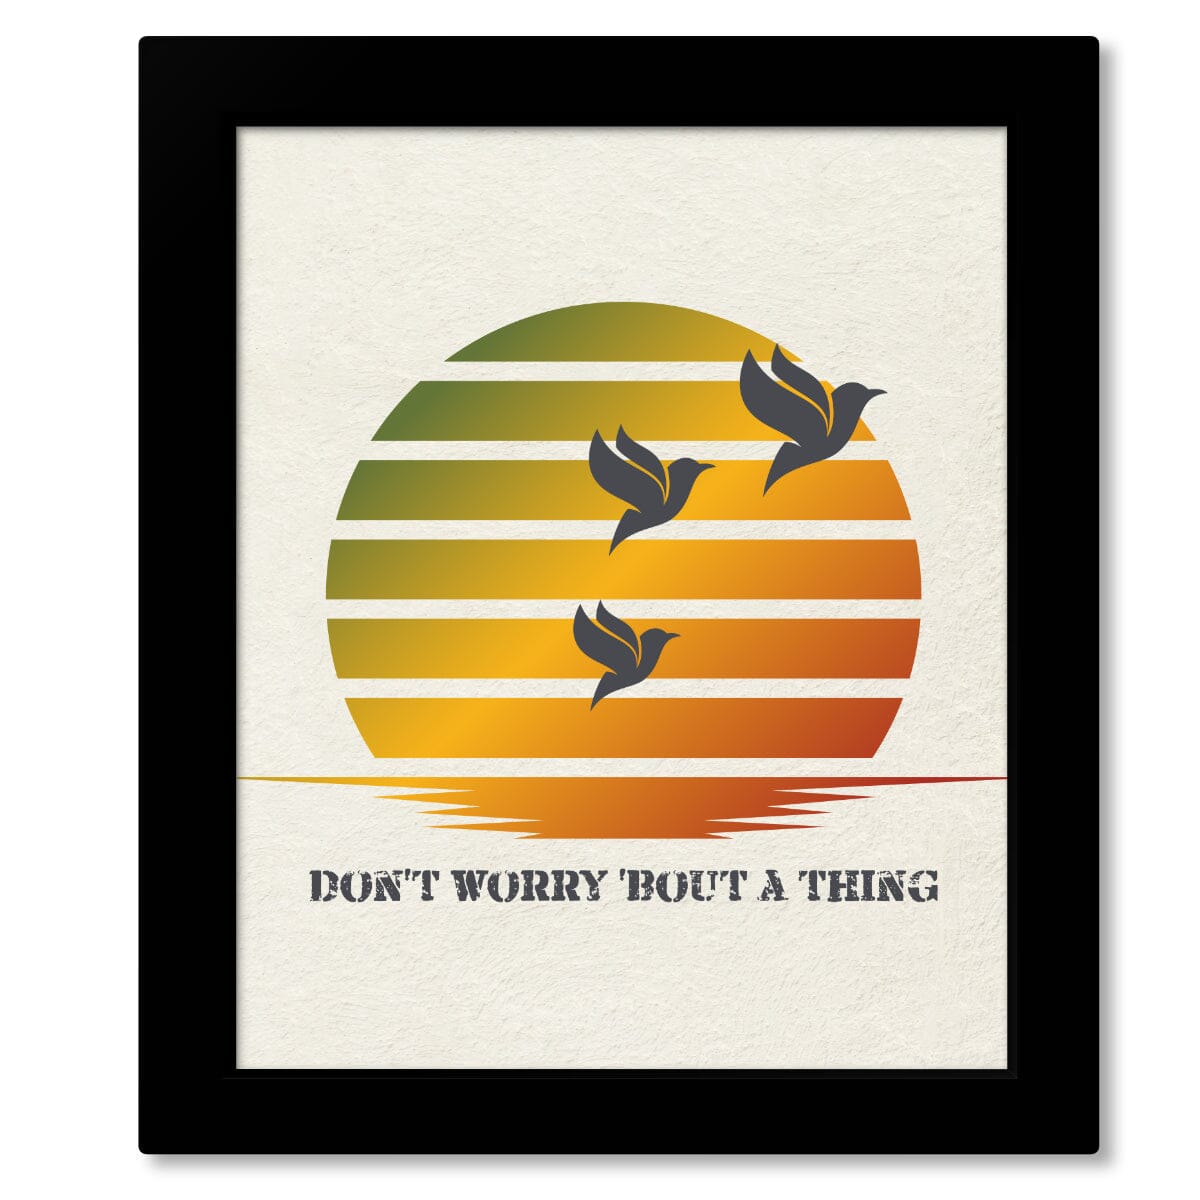 Three Little Birds by Bob Marley - Reggae Song Lyric Art Song Lyrics Art Song Lyrics Art 8x10 Framed Print (without mat) 